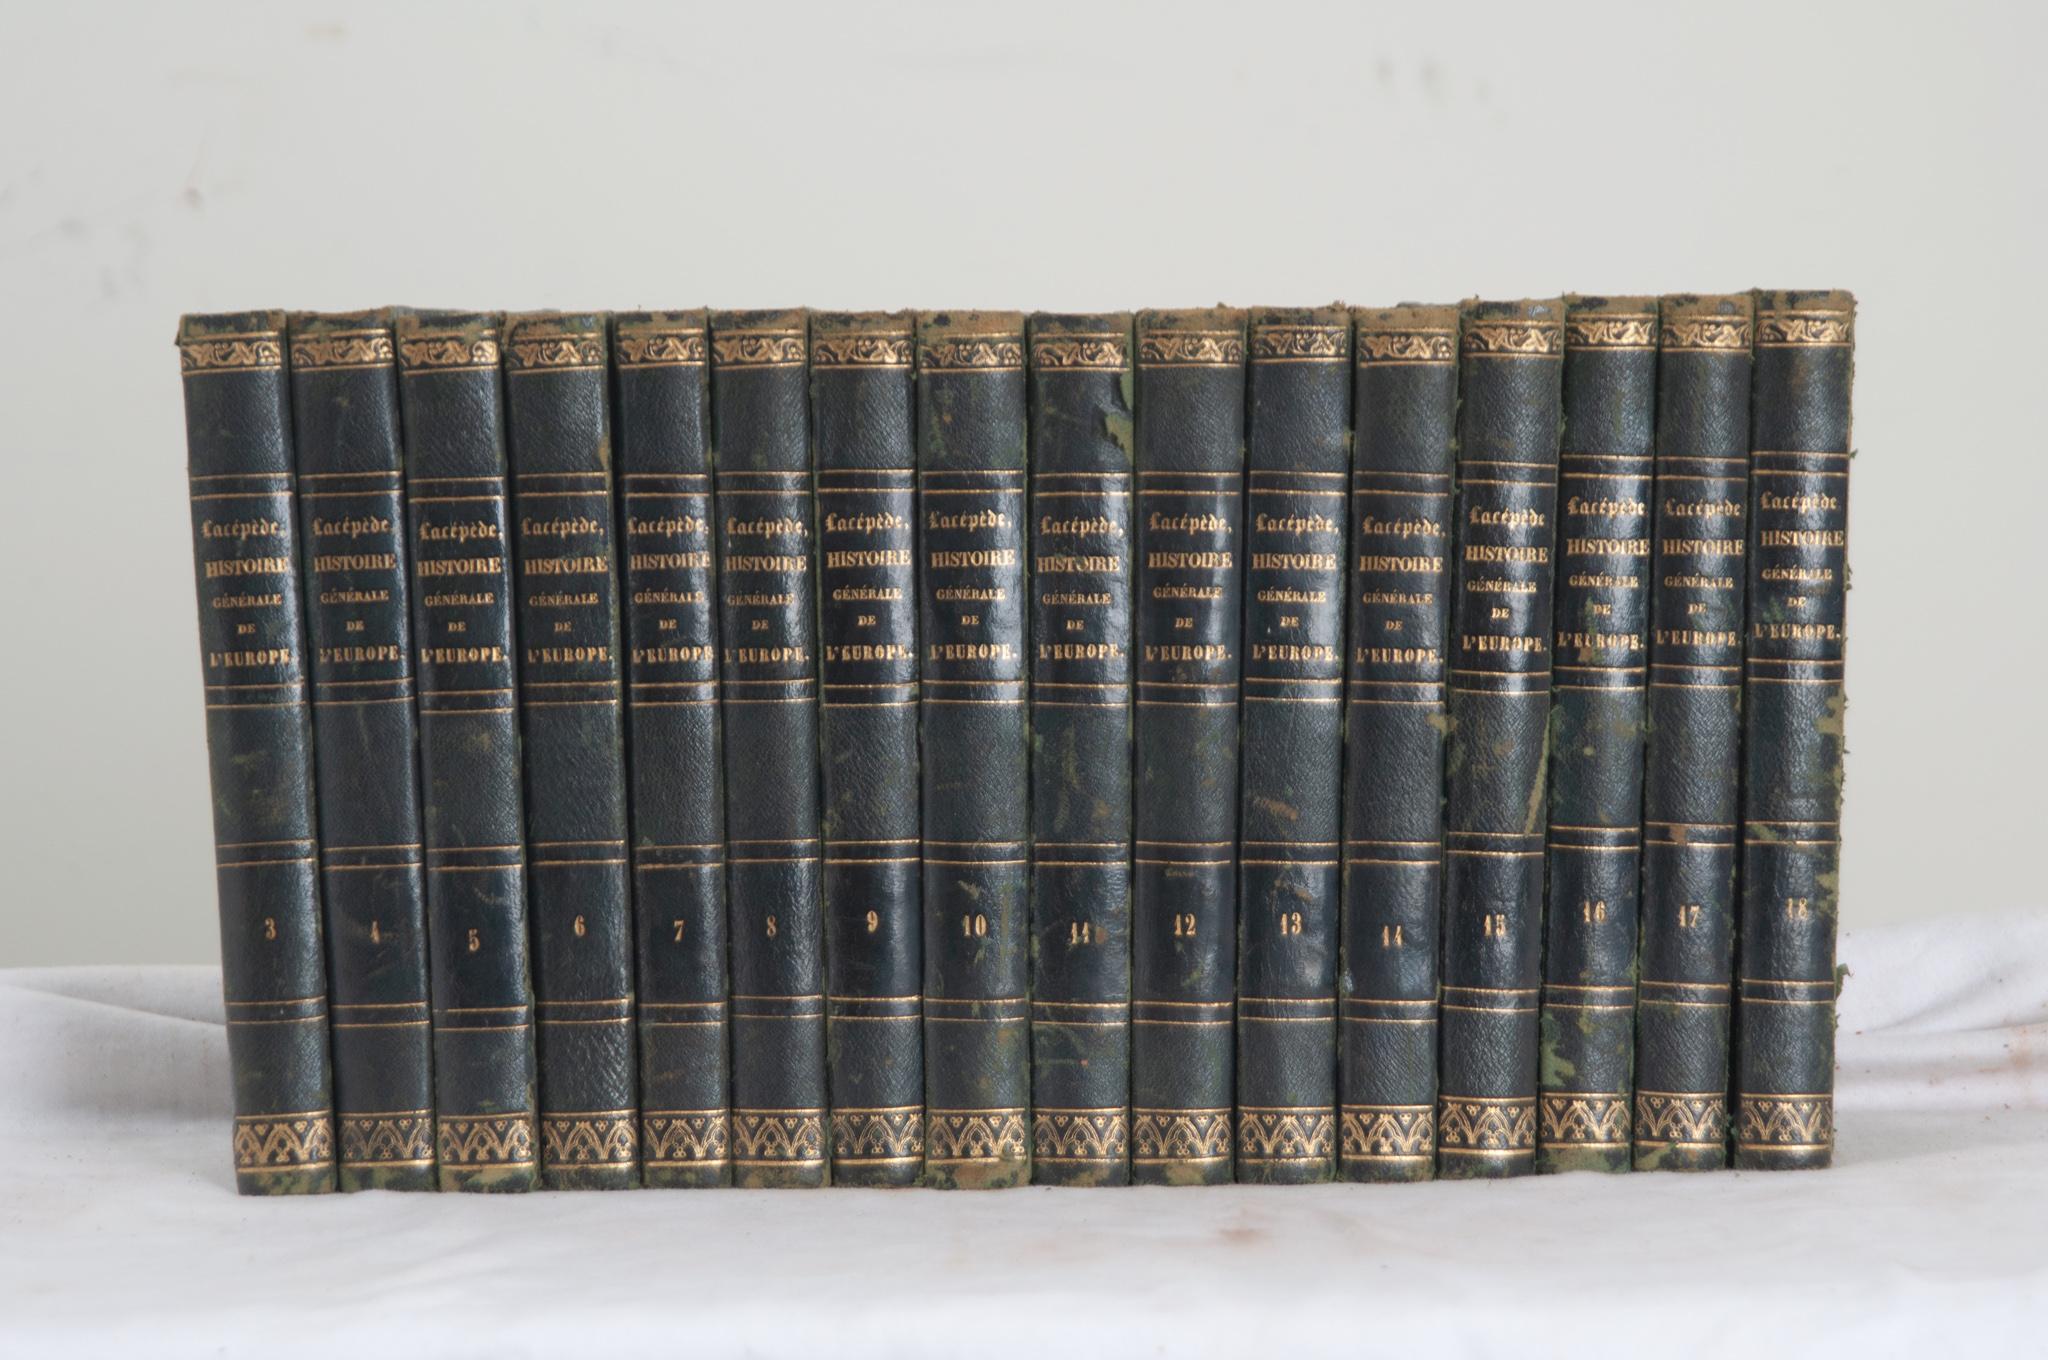 Other Set of 16 French History Books by M. LeCount de Lacépede